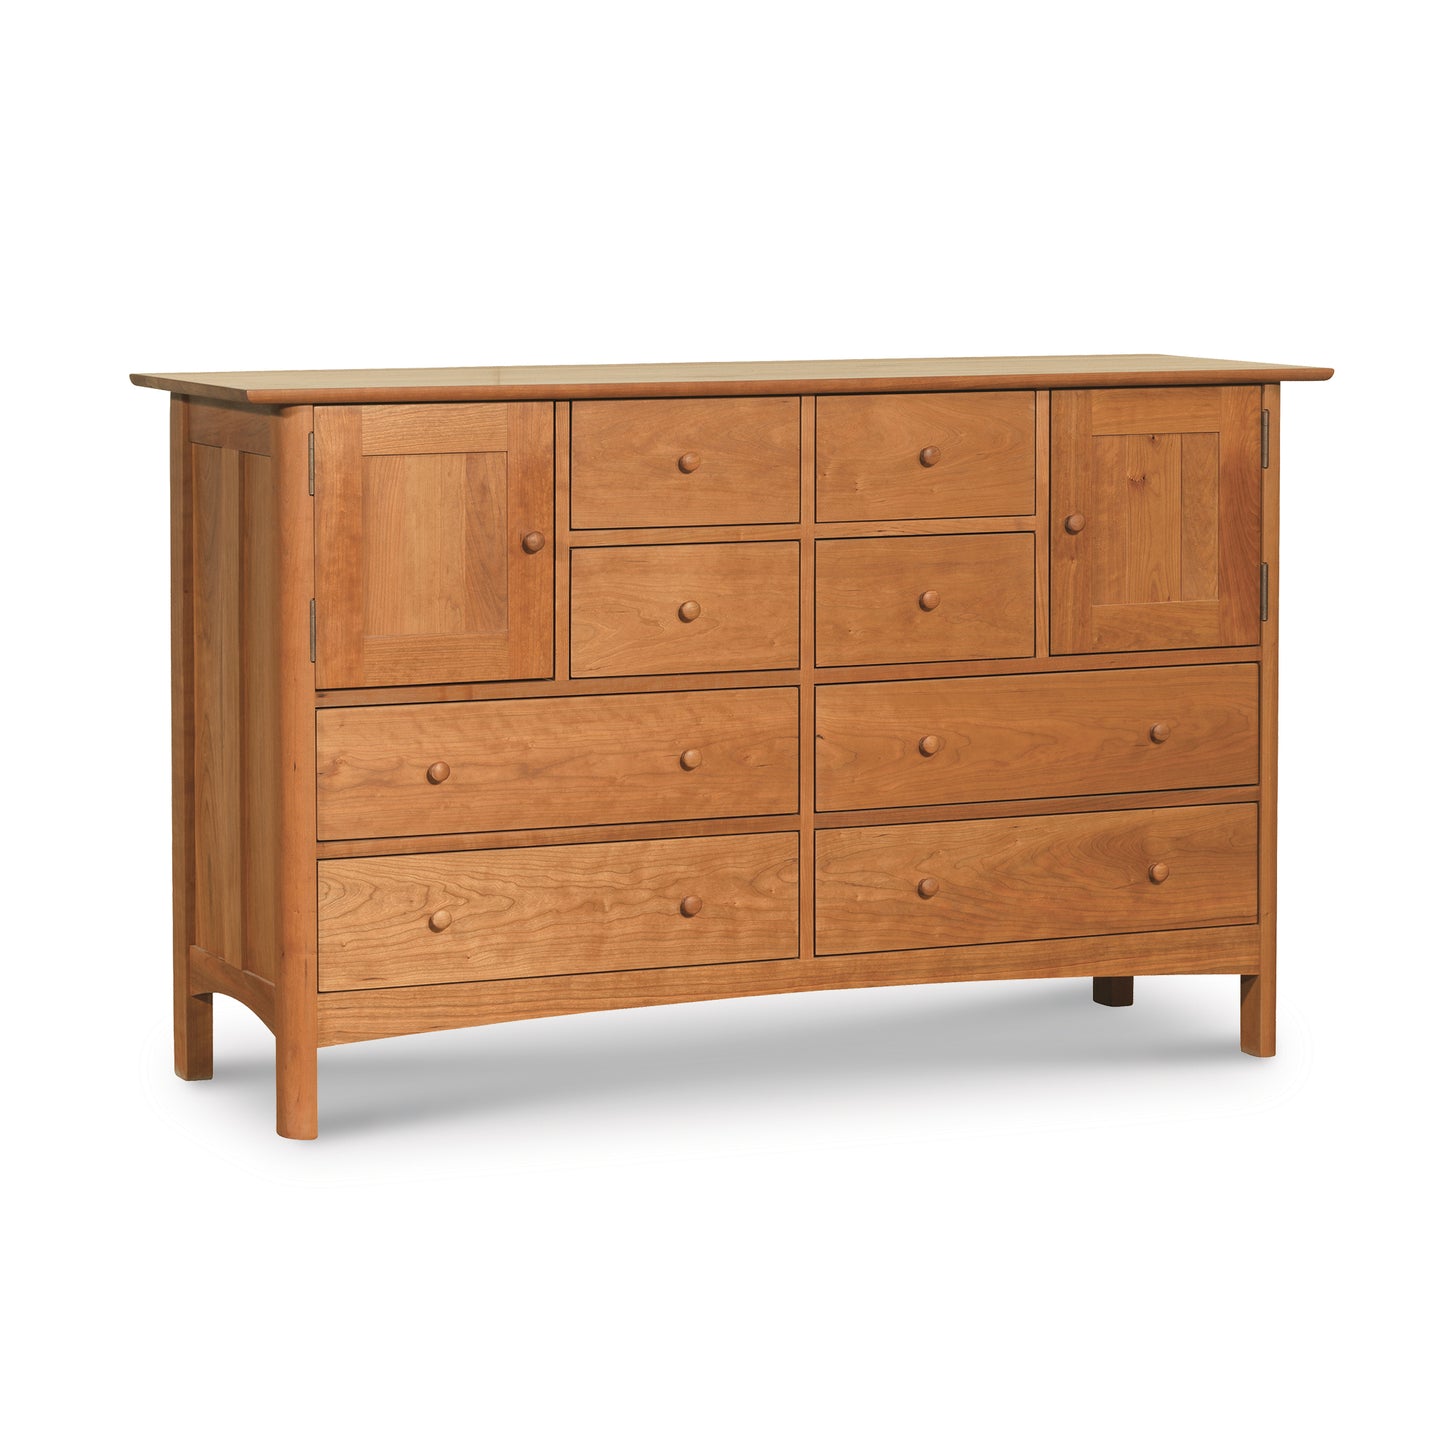 A Heartwood Shaker 8-Drawer 2-Door Dresser by Vermont Furniture Designs with multiple drawers against a white background, featuring an eco-friendly oil finish.